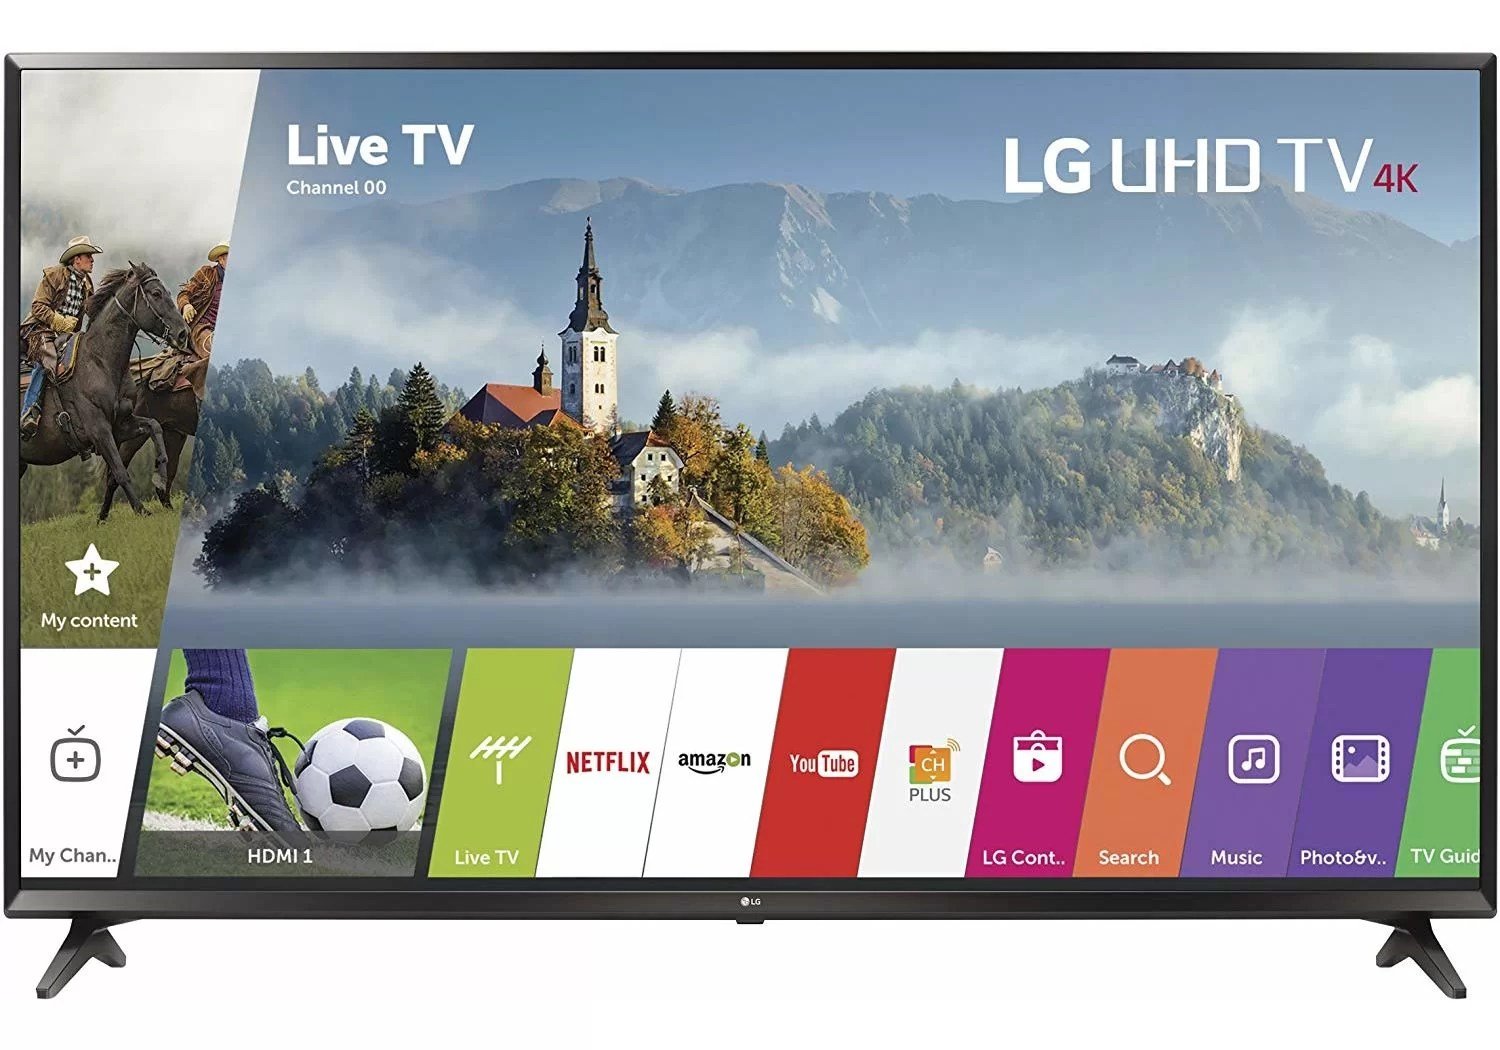 How to Update LG Smart TV (webOS Firmware)